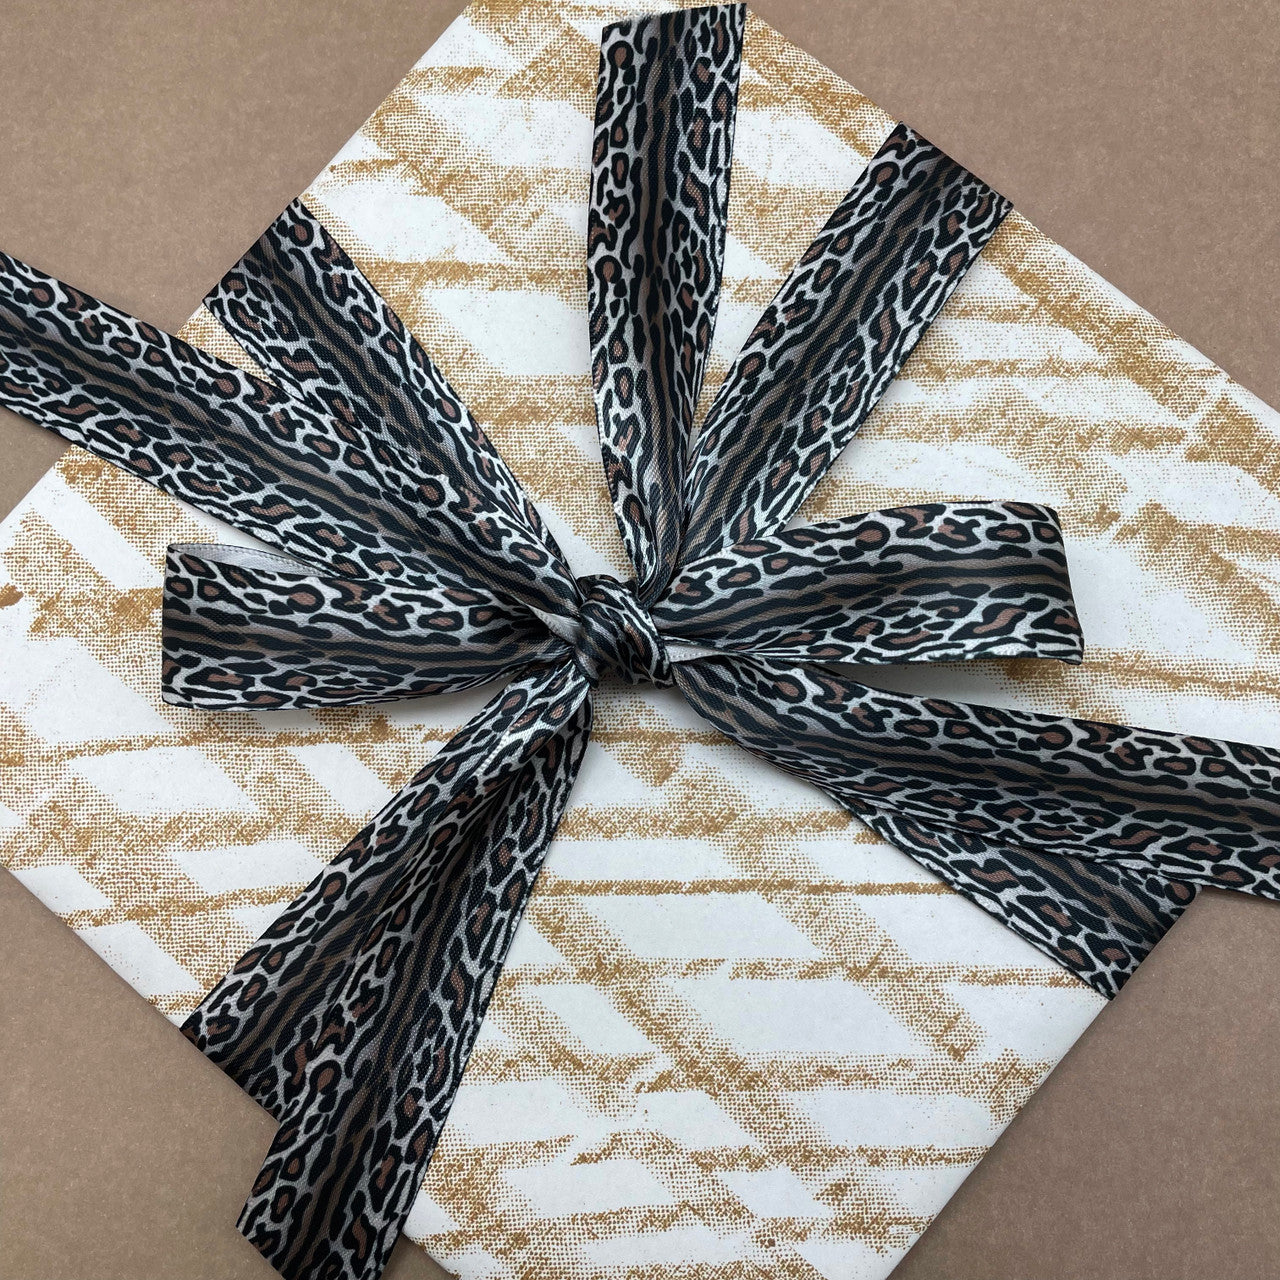 Ocelot pattern ribbon printed in shades of brown, black and gray tied on any gift makes for a beautiful presentation! 